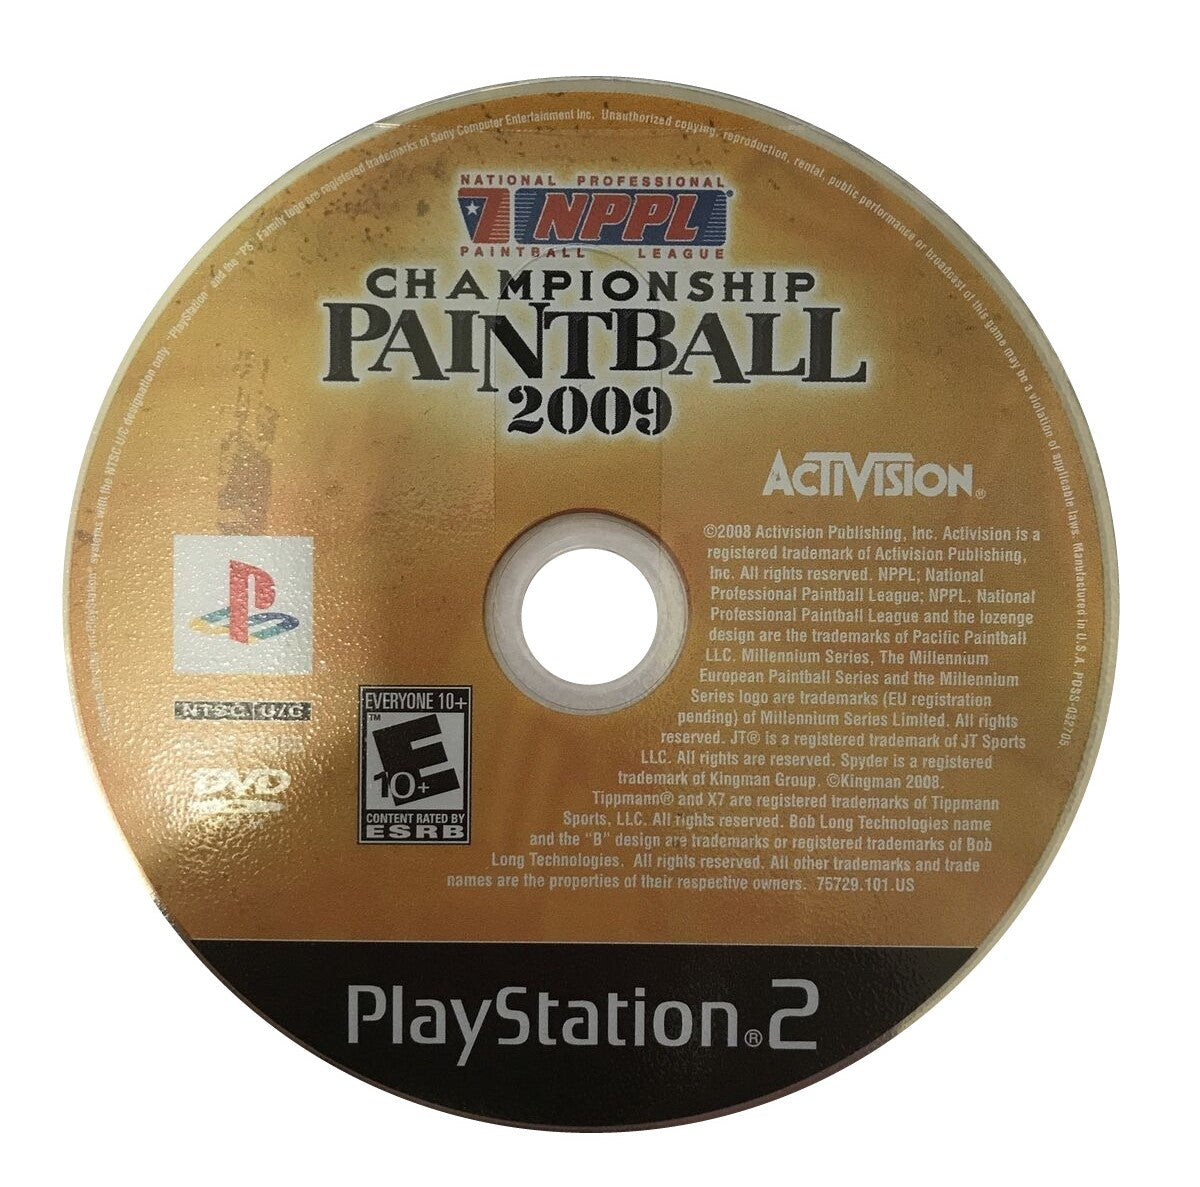 NPPL Championship Paintball 2009 - PlayStation 2 (PS2) Game